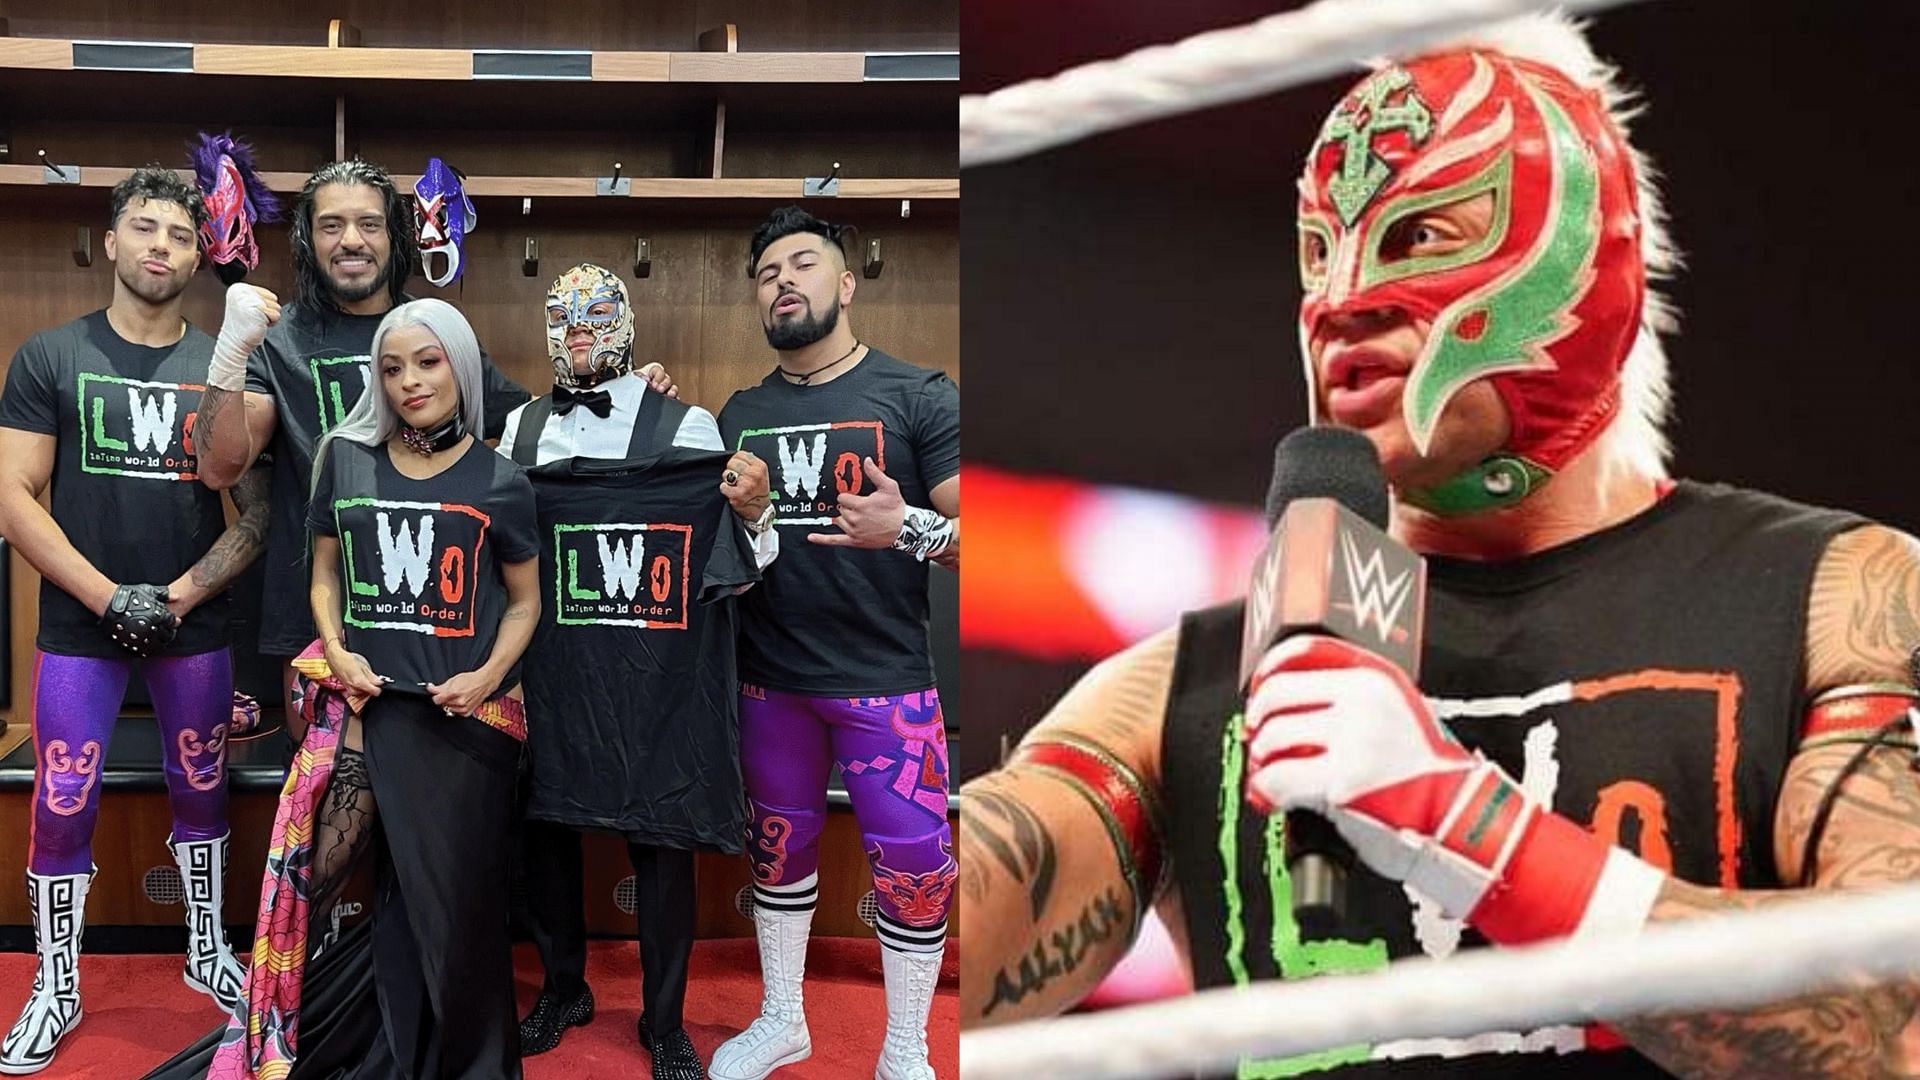 Rey Mysterio recently reformed the LWO